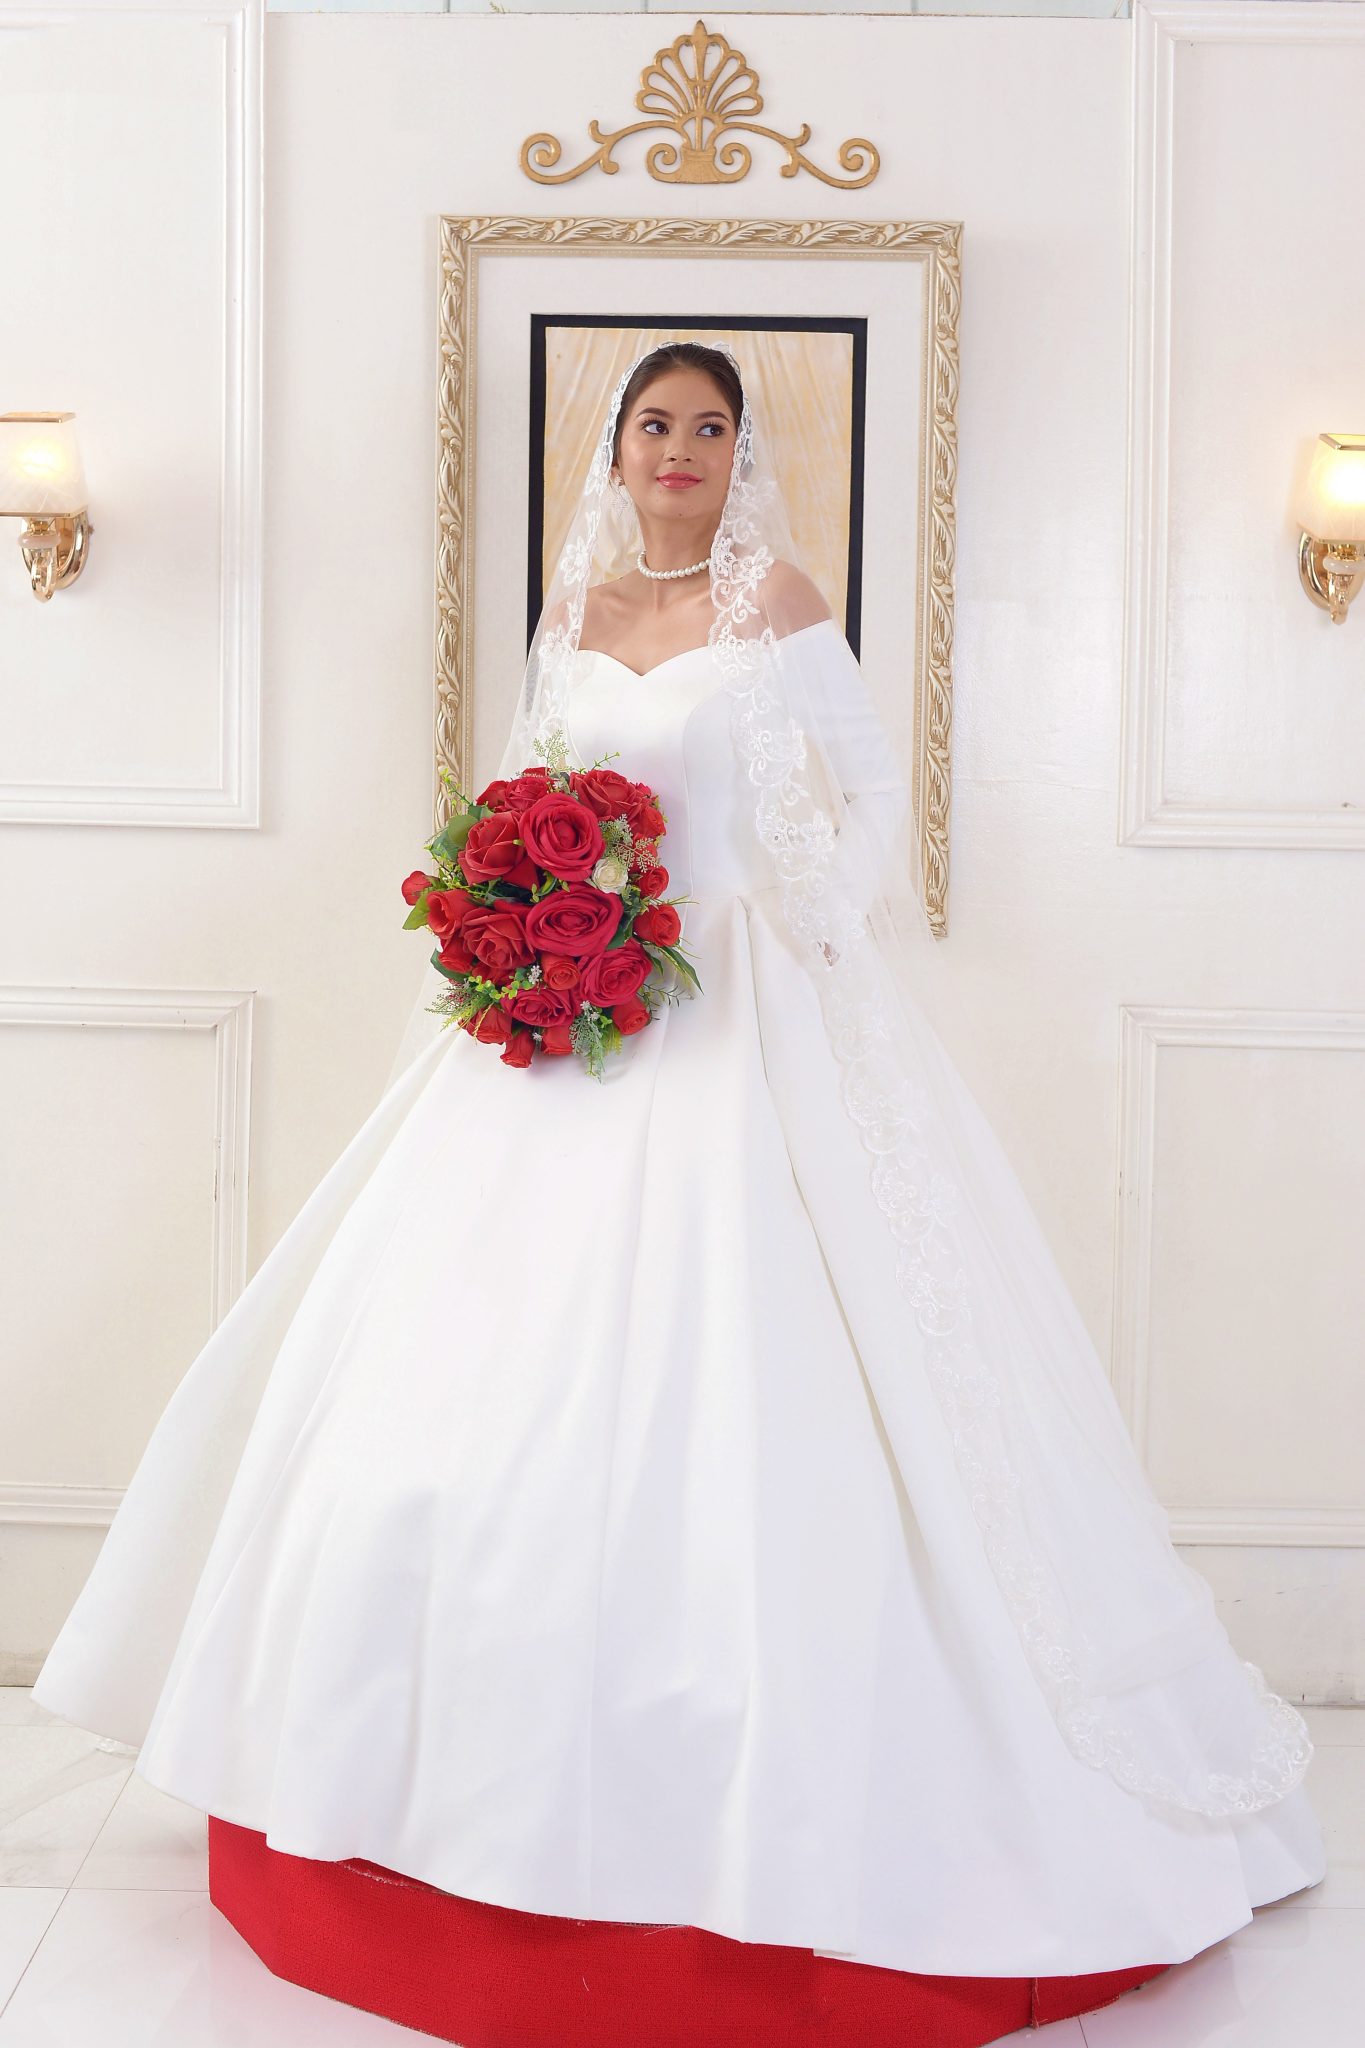 Gowns and Suits for Rent Philippines - NAVY BLUE OFFSHOULDER BALLGOWN Rent  price 5k Deposit fee 5k (refundable) Visit us here #21 J Molina St  Concepcion Uno Marikina City TCMI FASHION ACADEMY